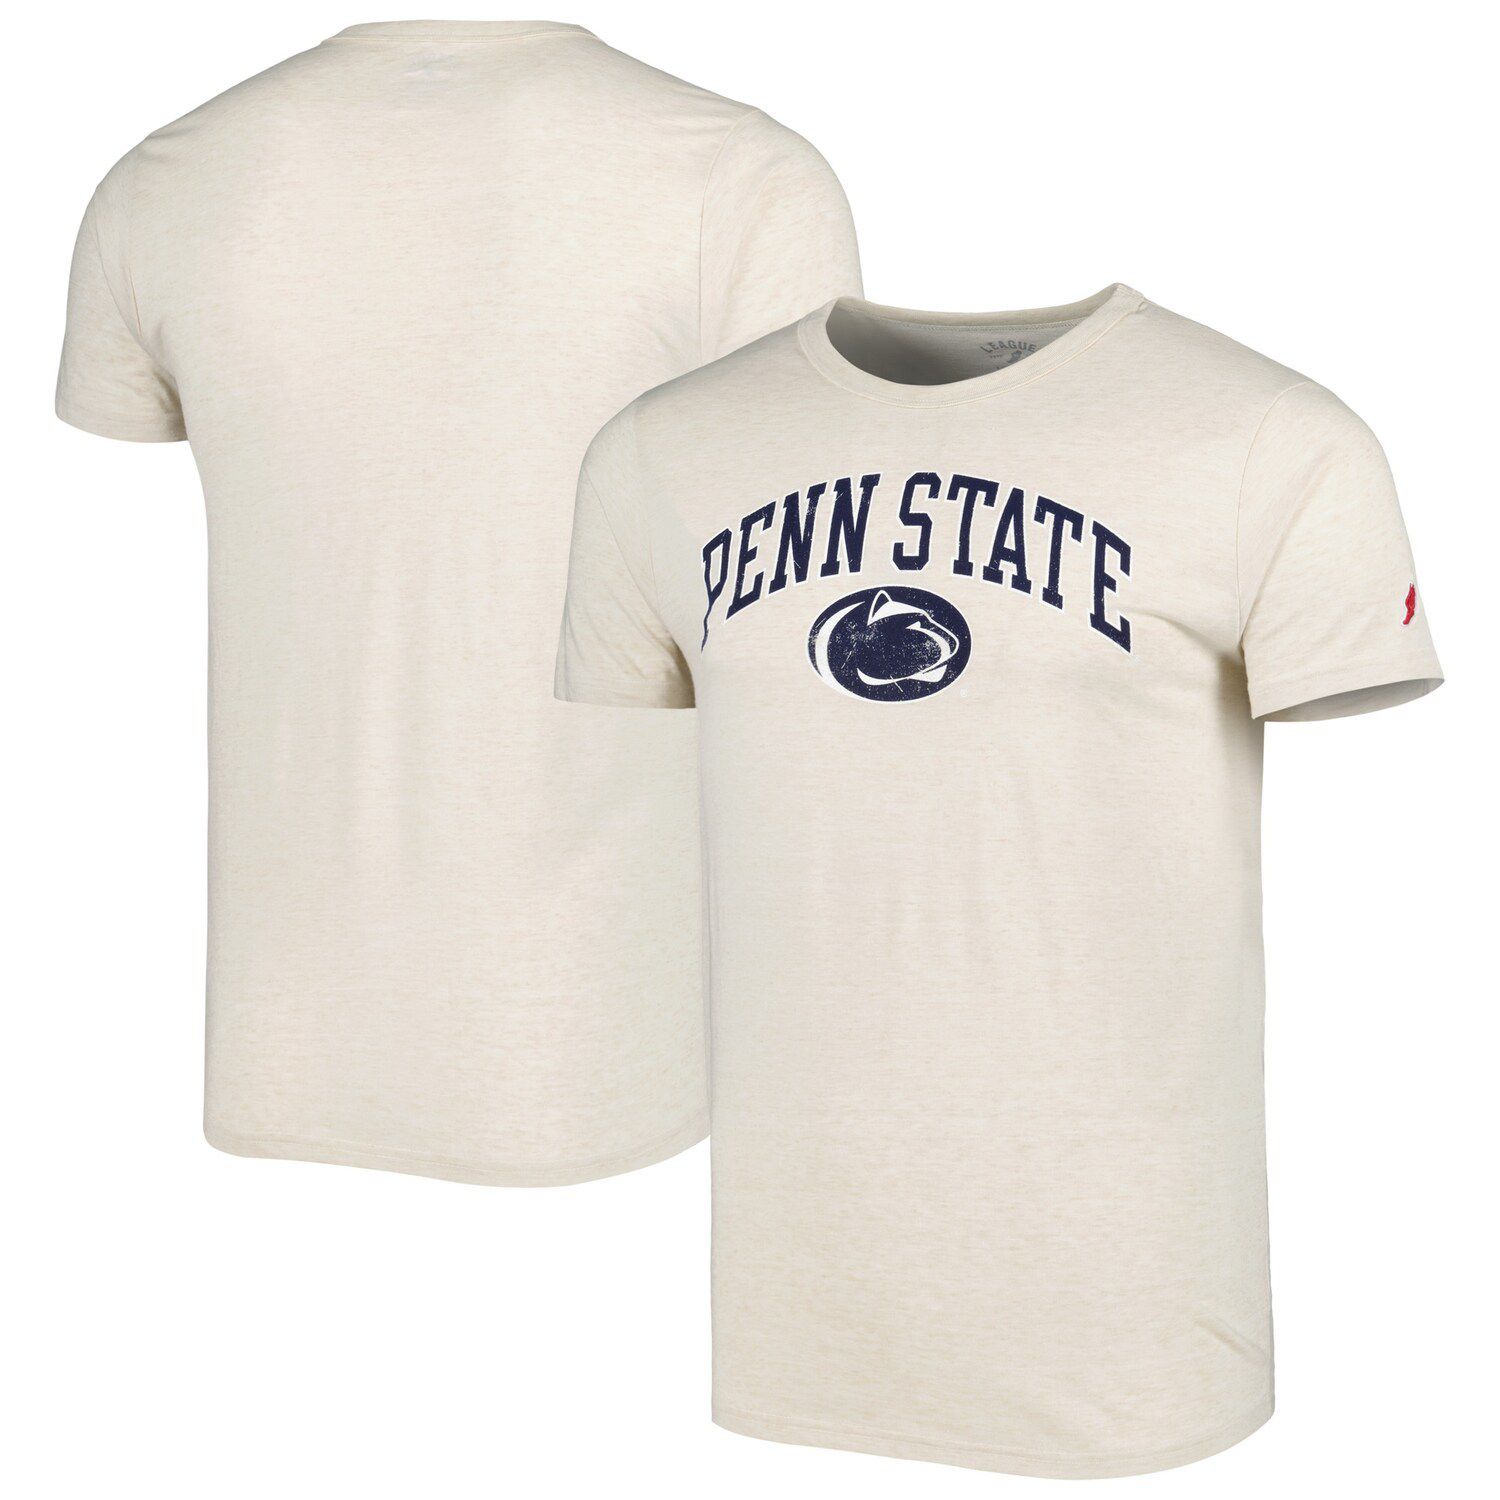 Men's Nike White Penn State Nittany Lions 2021 White Out Student T